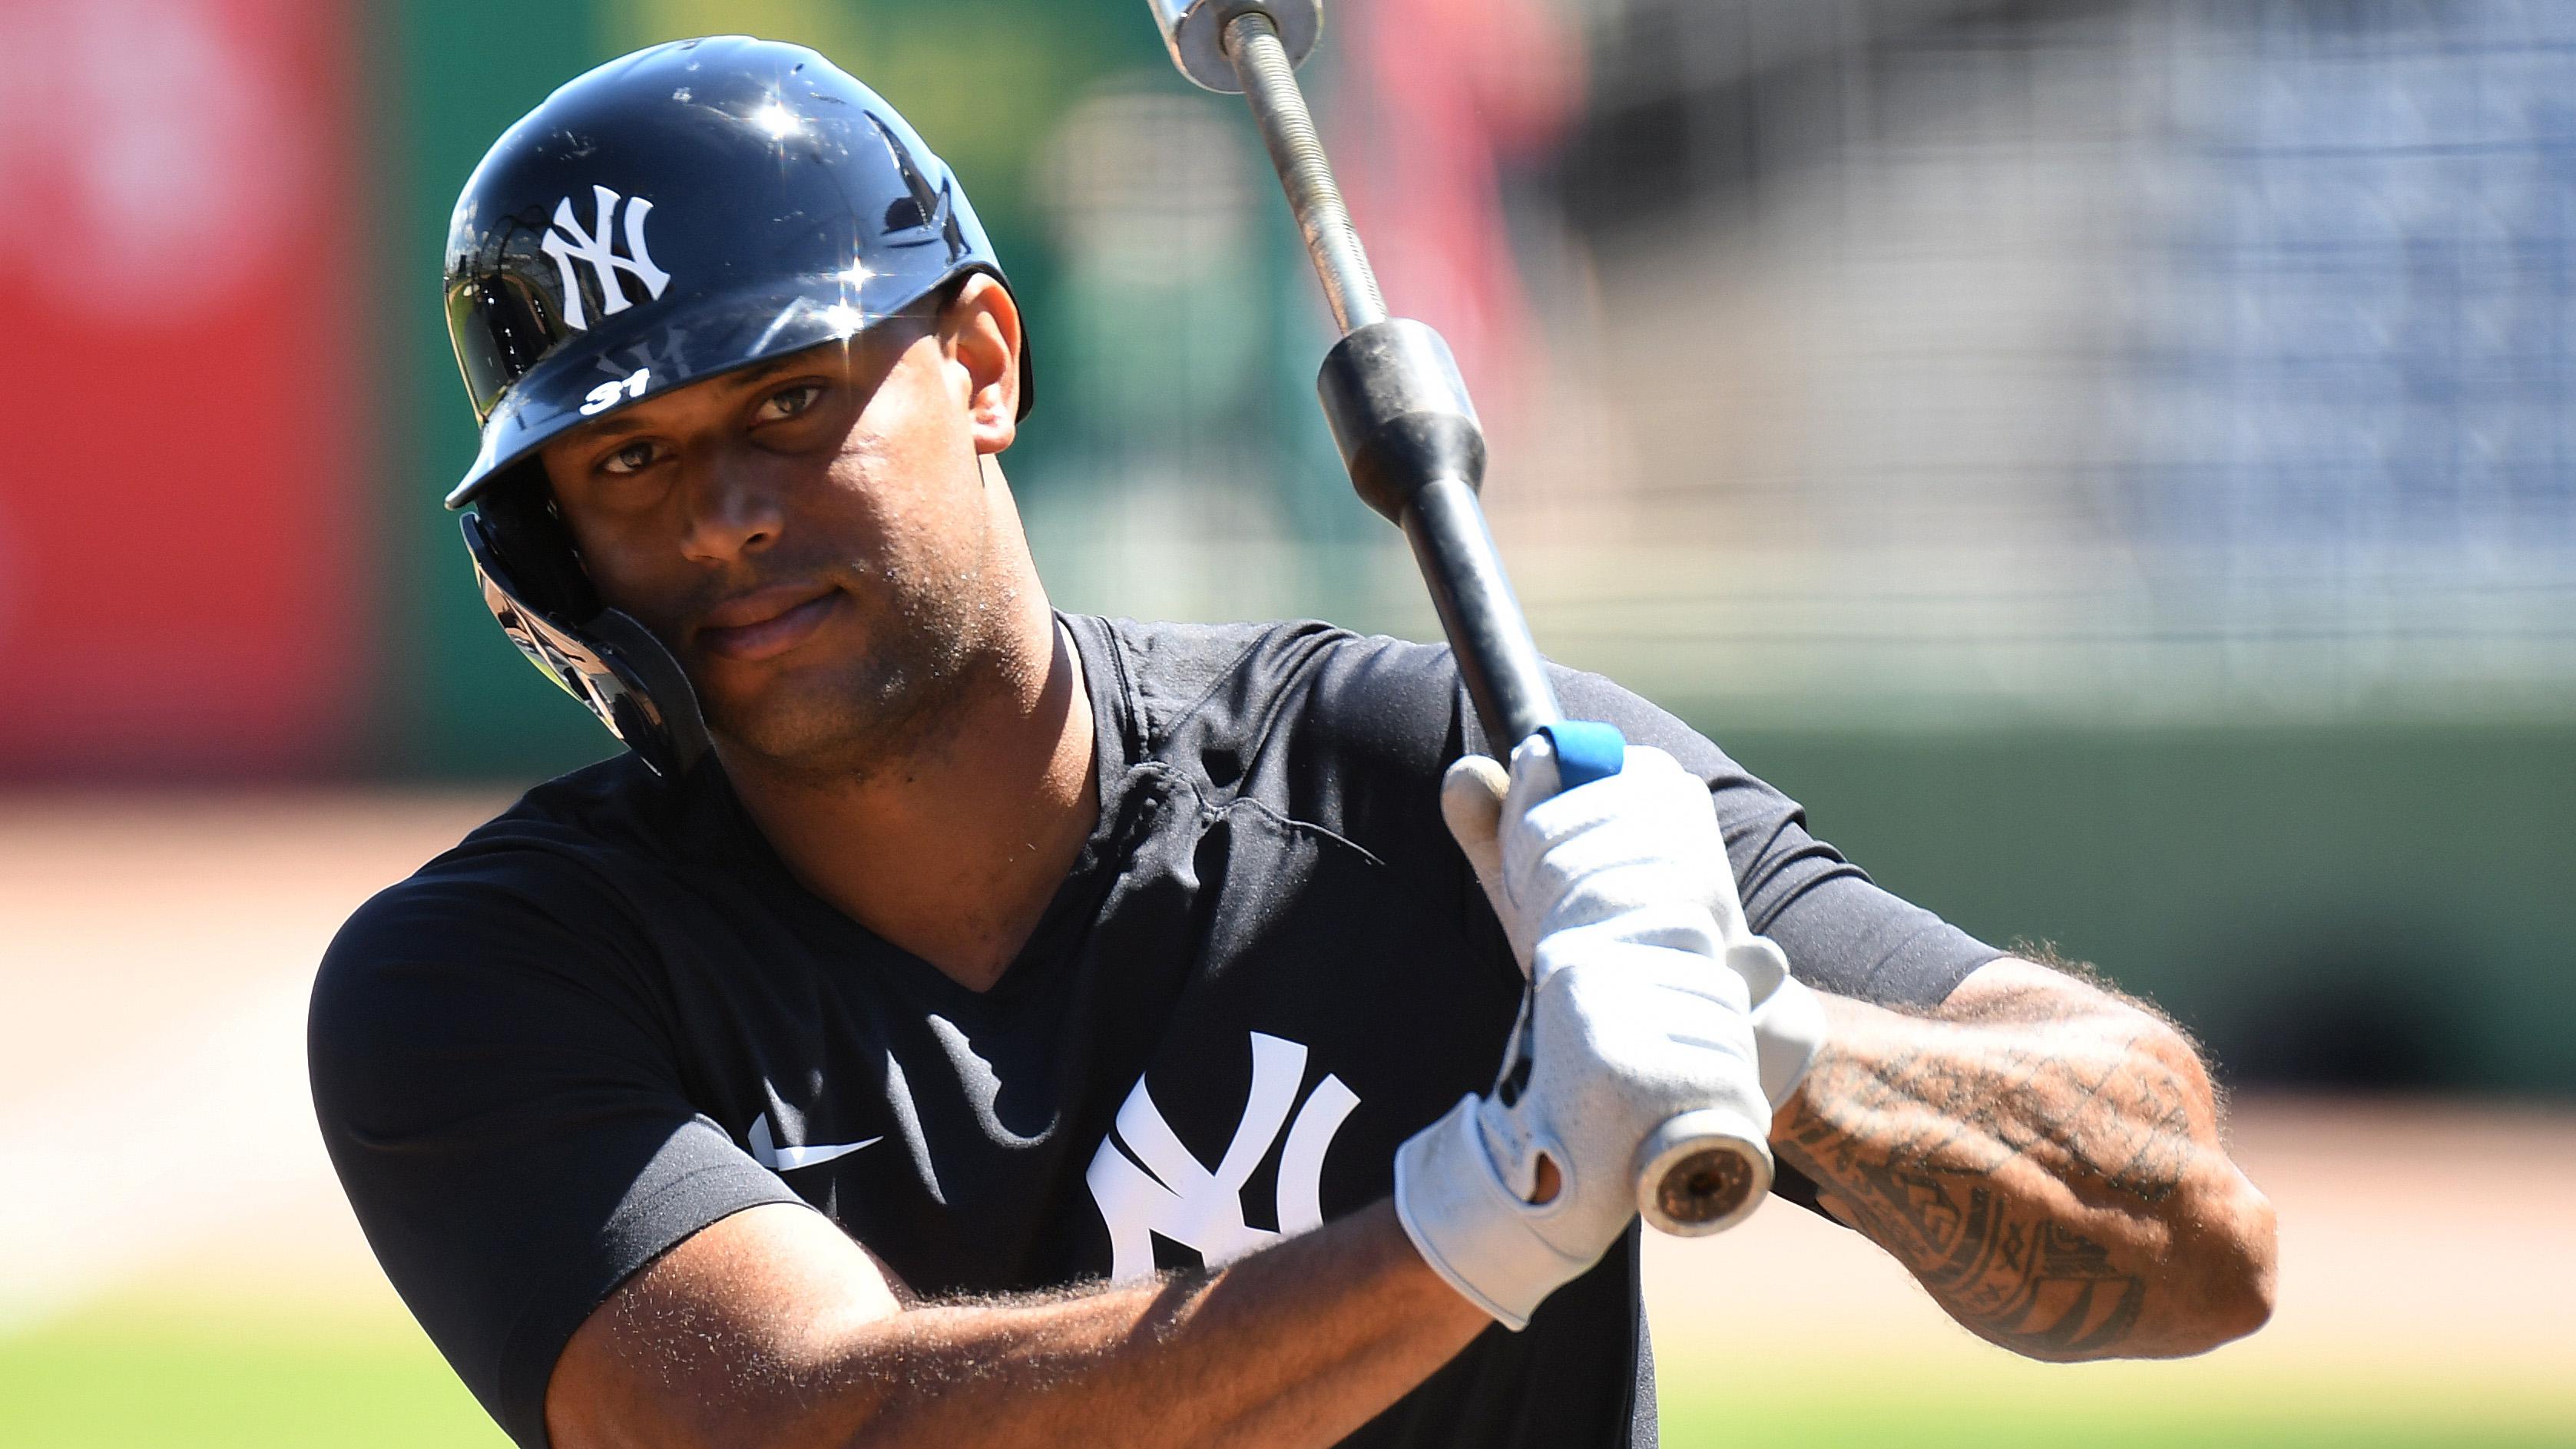 New York Yankees outfielder Aaron Hicks (31) prepares to take batting practice before the game against the Philadelphia Phillies during spring training at BayCare Ballpark. / Jonathan Dyer-USA TODAY Sports